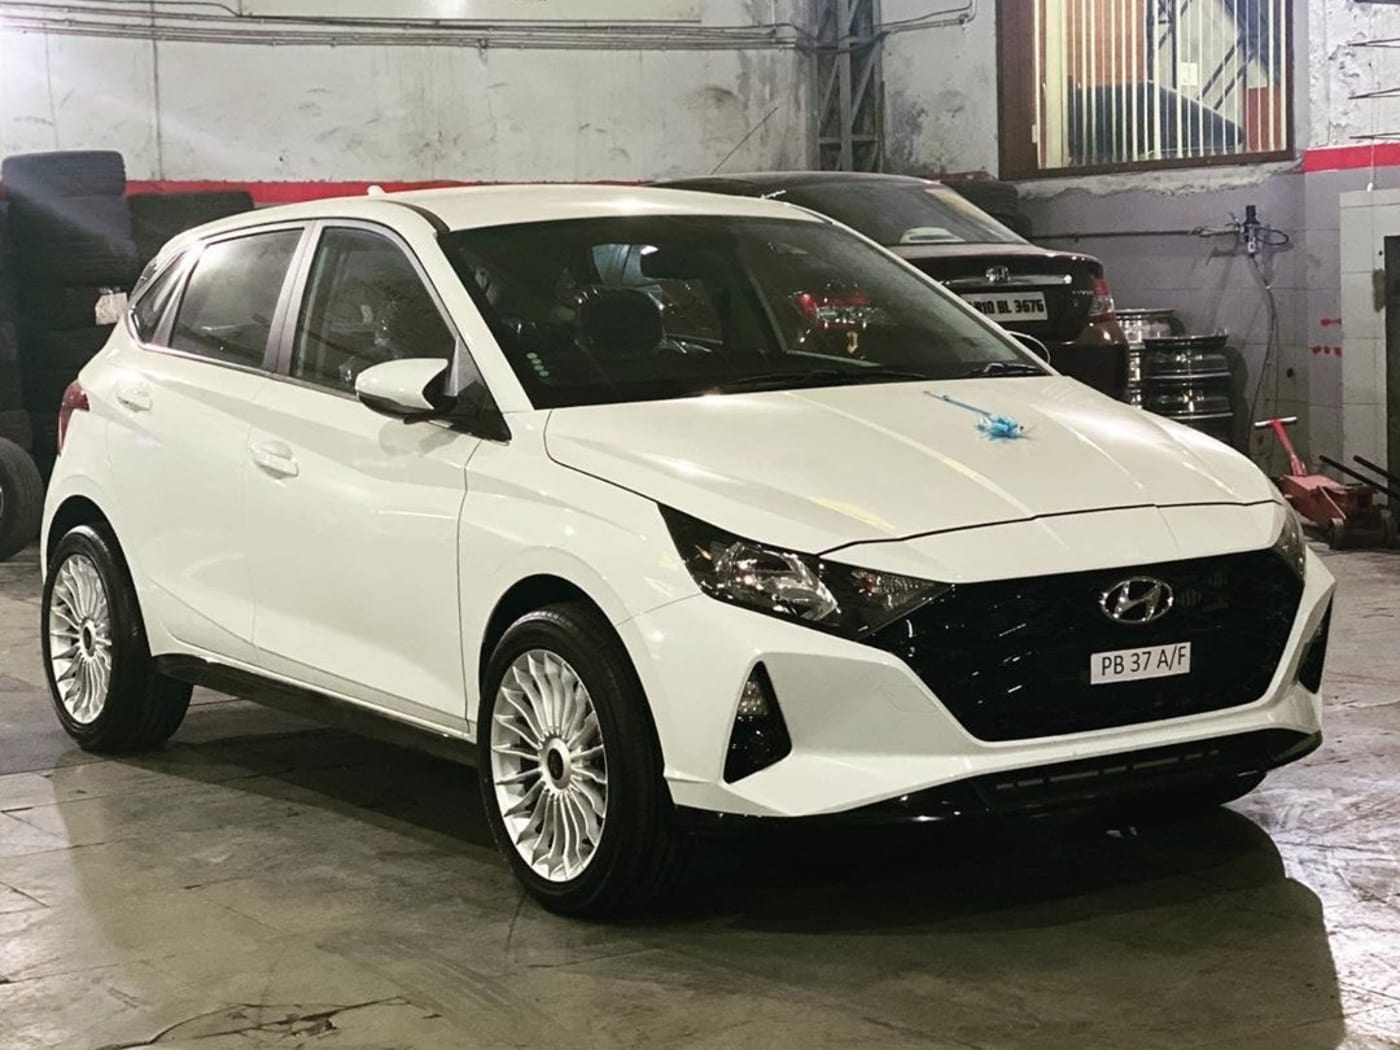 India's First Modified NewGen Hyundai i20 Gets 17Inch Aftermarket Alloys